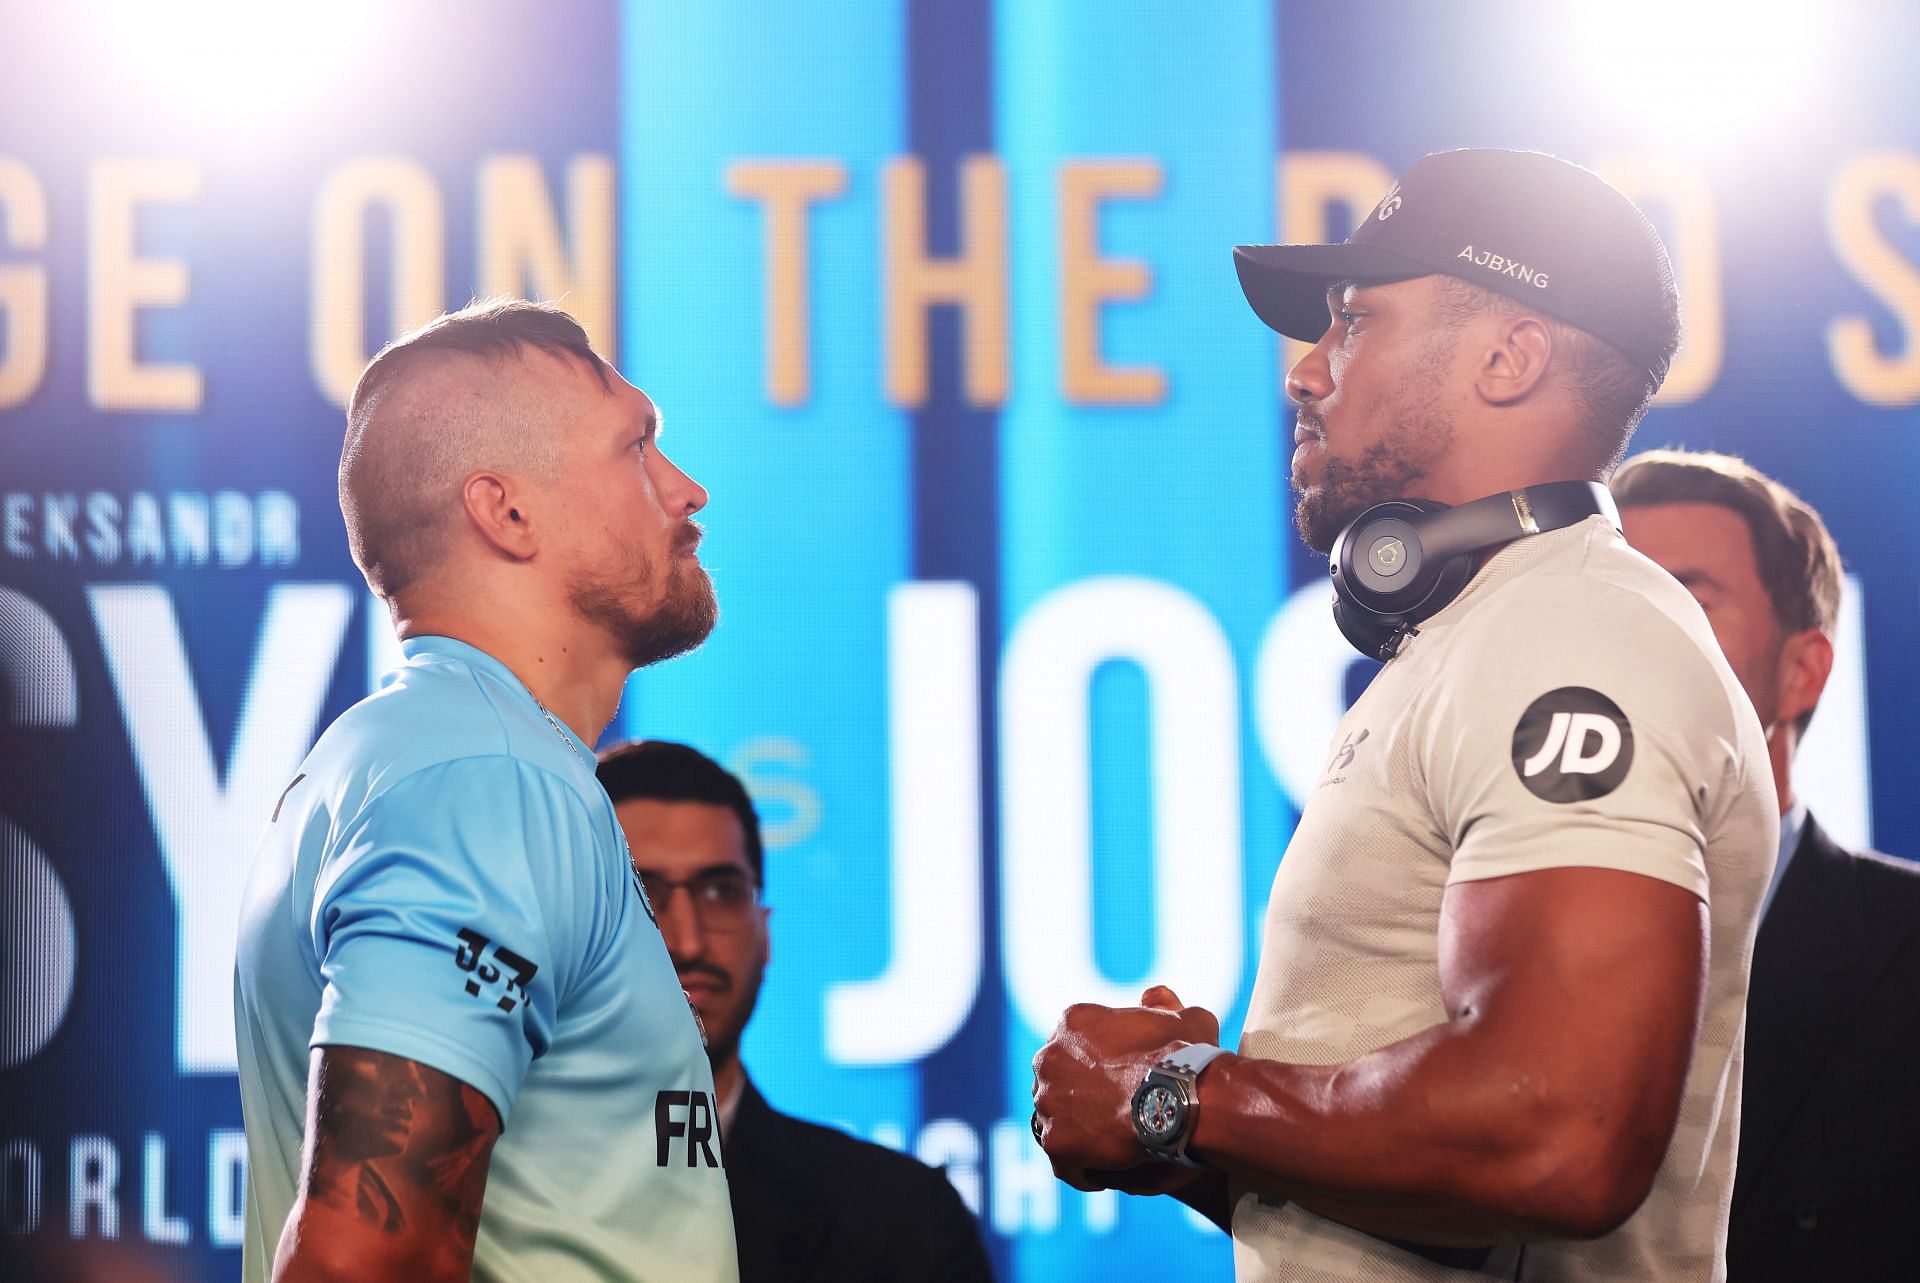 Oleksandr Usyk and Anthony Joshua face off during the Oleksandr Usyk v Anthony Joshua 2 Press Conference on June 29, 2022 in London, England. (Photo by Alex Pantling/Getty Images)